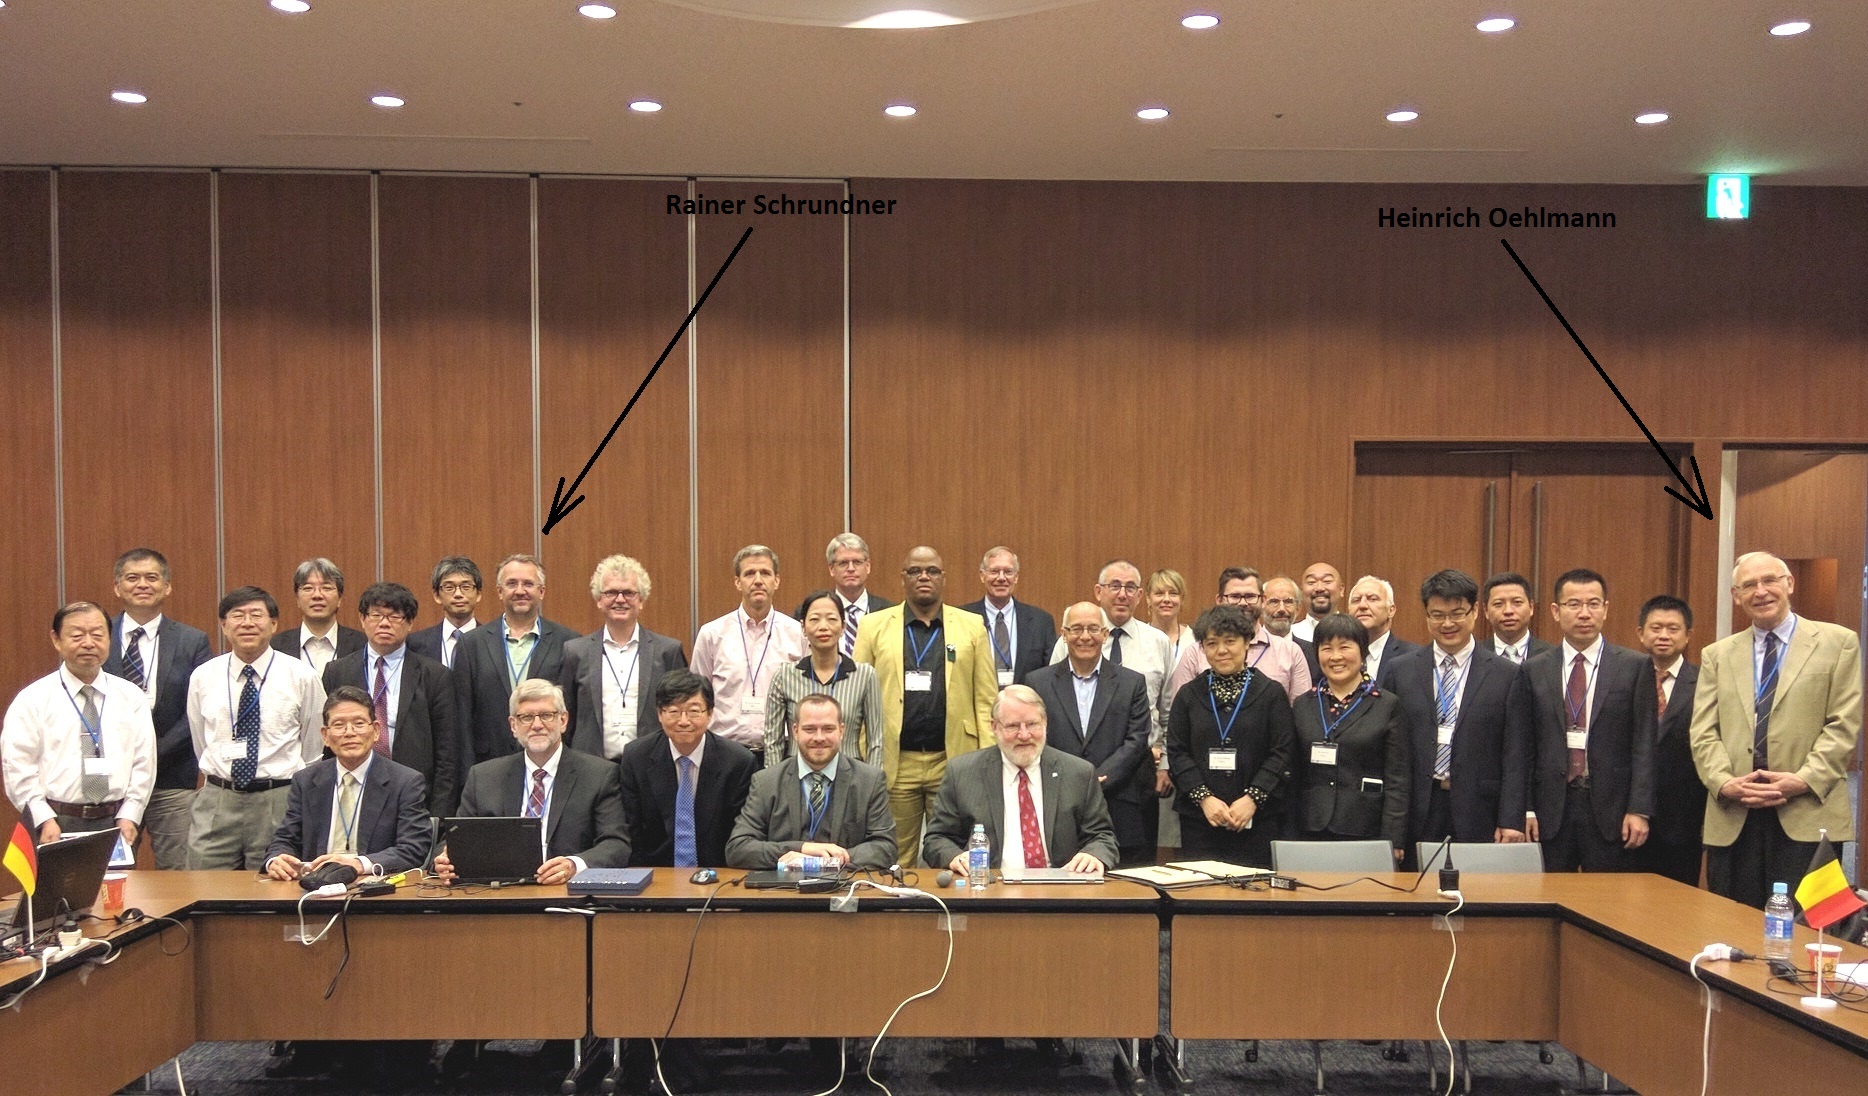 Photo of group ISO IEC JTC1 SC31 - 2016 - with german  delegation consisting of Heinrich Oehlmann (Elmicron) and Rainer Schrundner (ident.one)